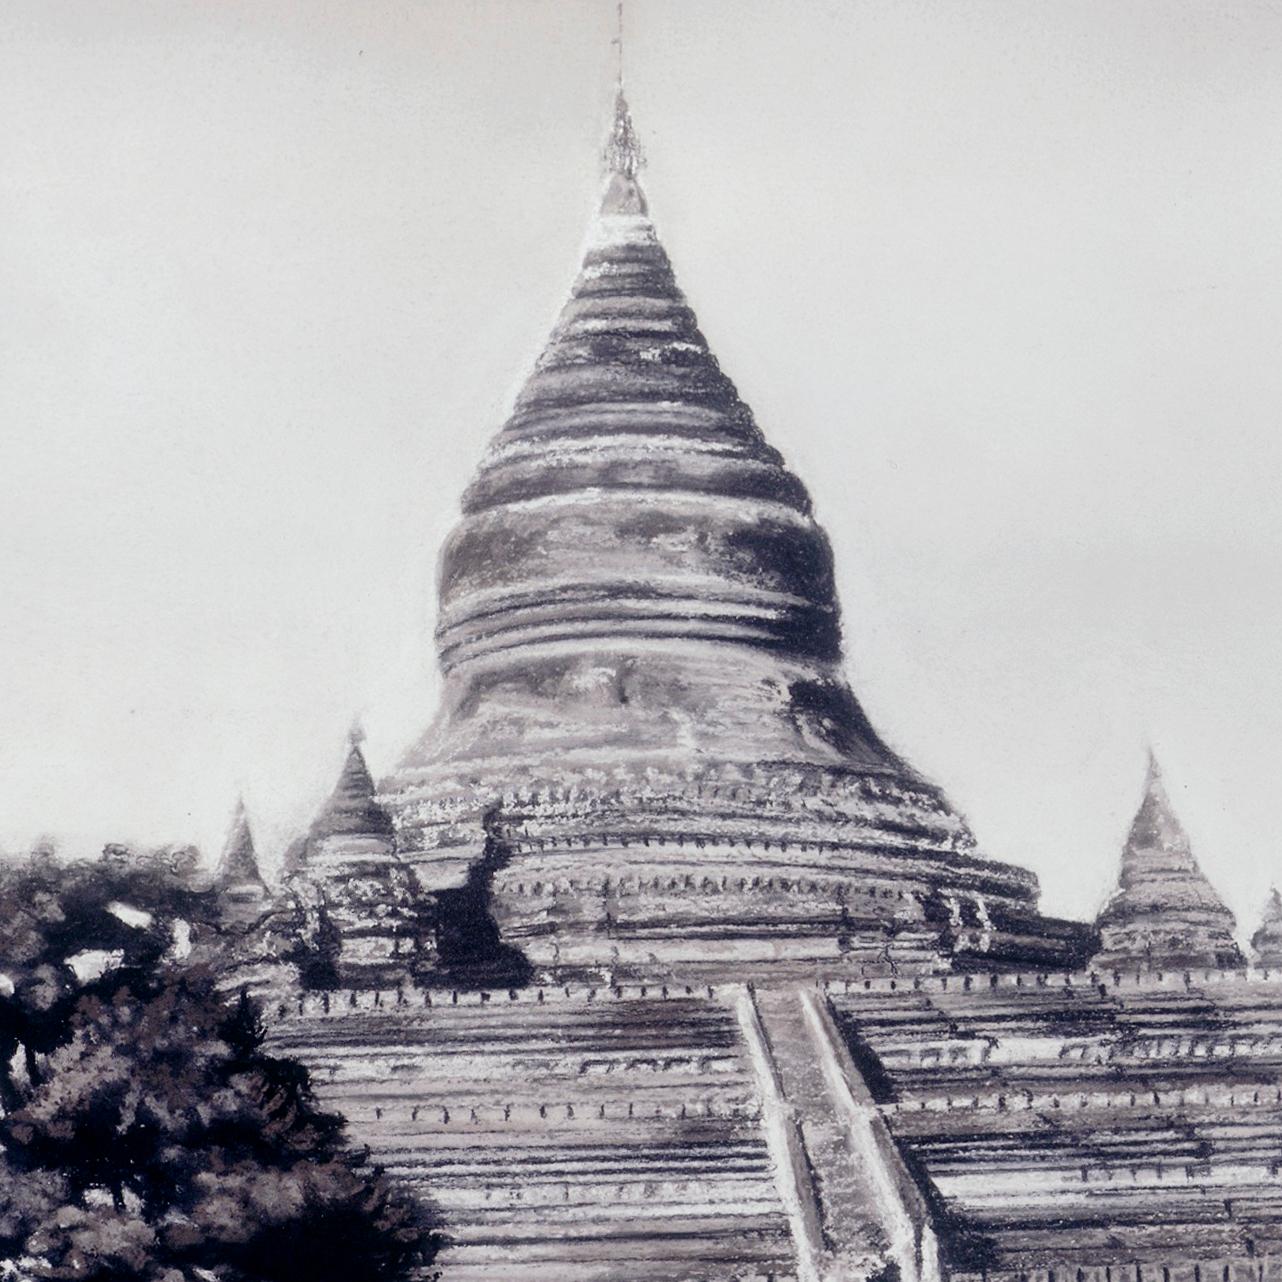 This black and white charcoal and pastel painting features a Burmese temple landscape. Rising from clouds of gnarled trees, the temple’s triangular shape thins to a pointed dome, with smaller turrets rising around each thinly striated layer of the